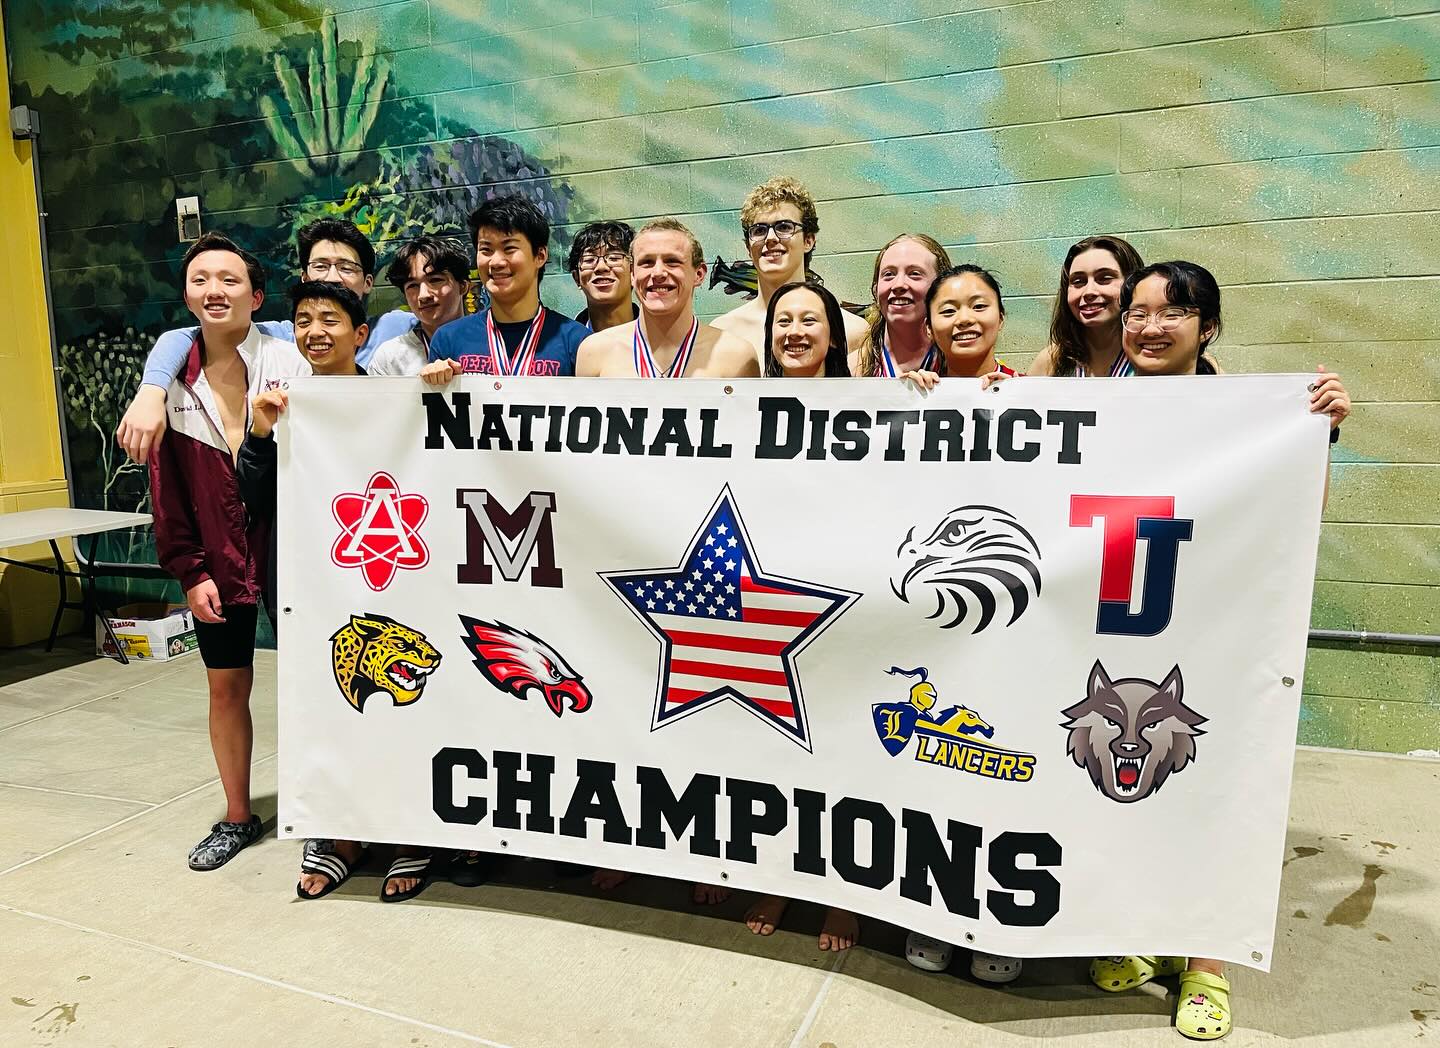 Securing the title as champions, the Jefferson Swim and Dive team poses with their National District Champions banner. “We were undefeated on the girls and guys side,” senior captain Paige Burke said. “I’m really proud of everyone.”